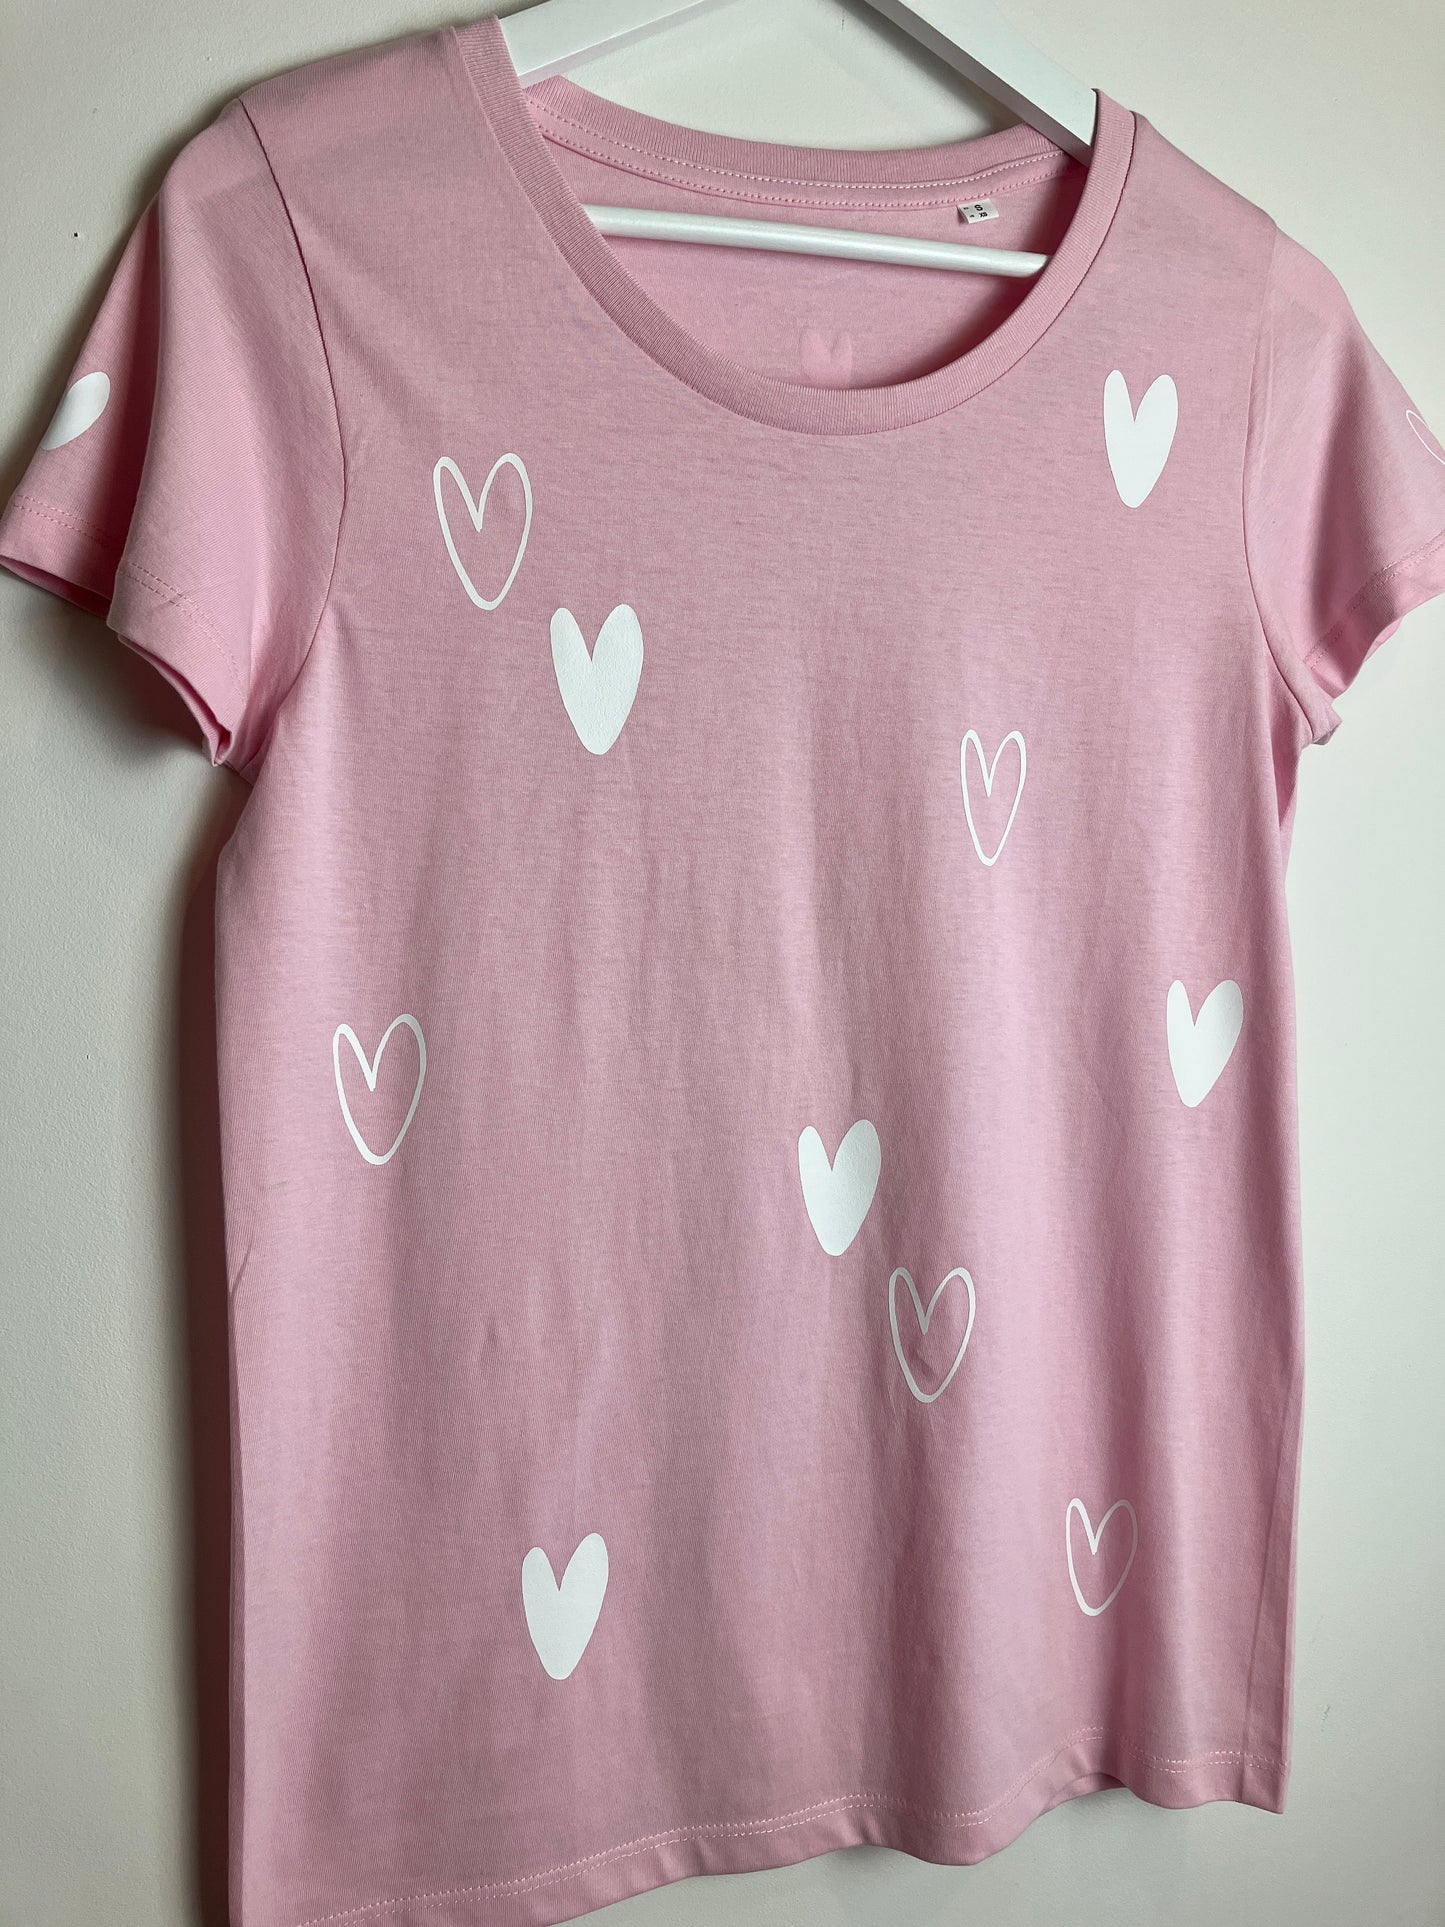 All the Hearts t-shirt- customisable block and outline print